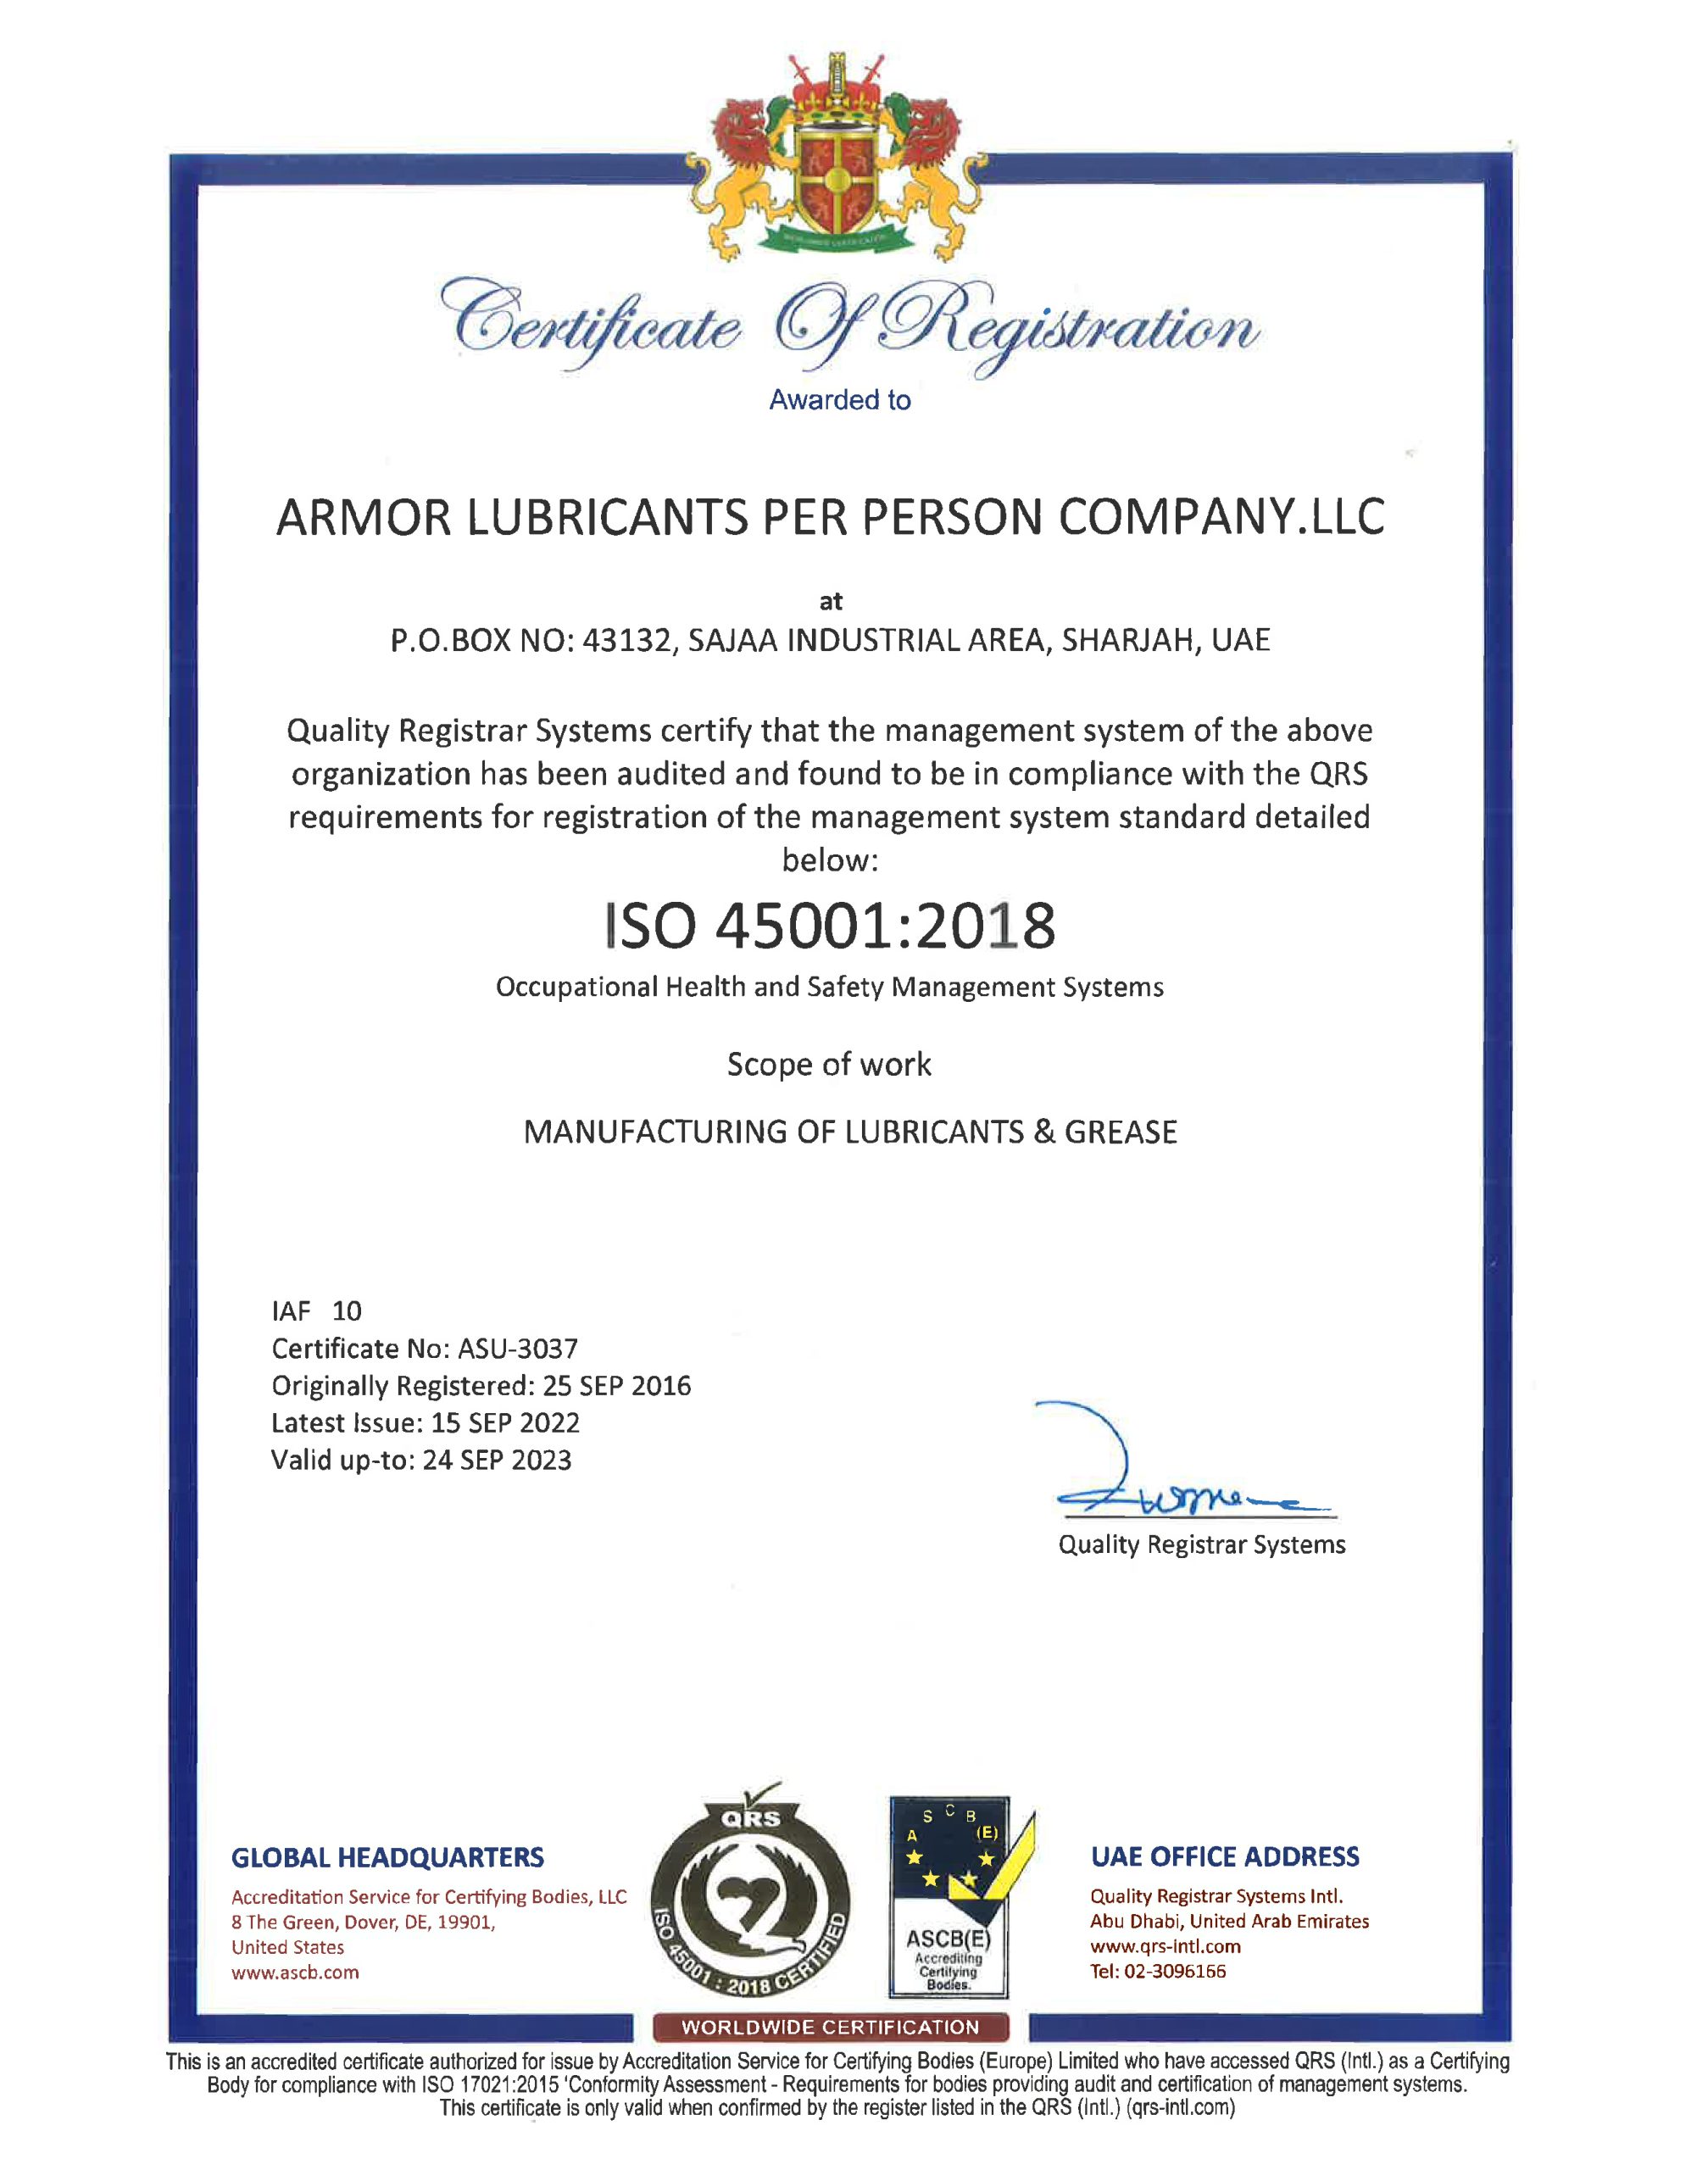 Armor ISO 45001 Occupational Health and Safety (OH&S) Management System Certification